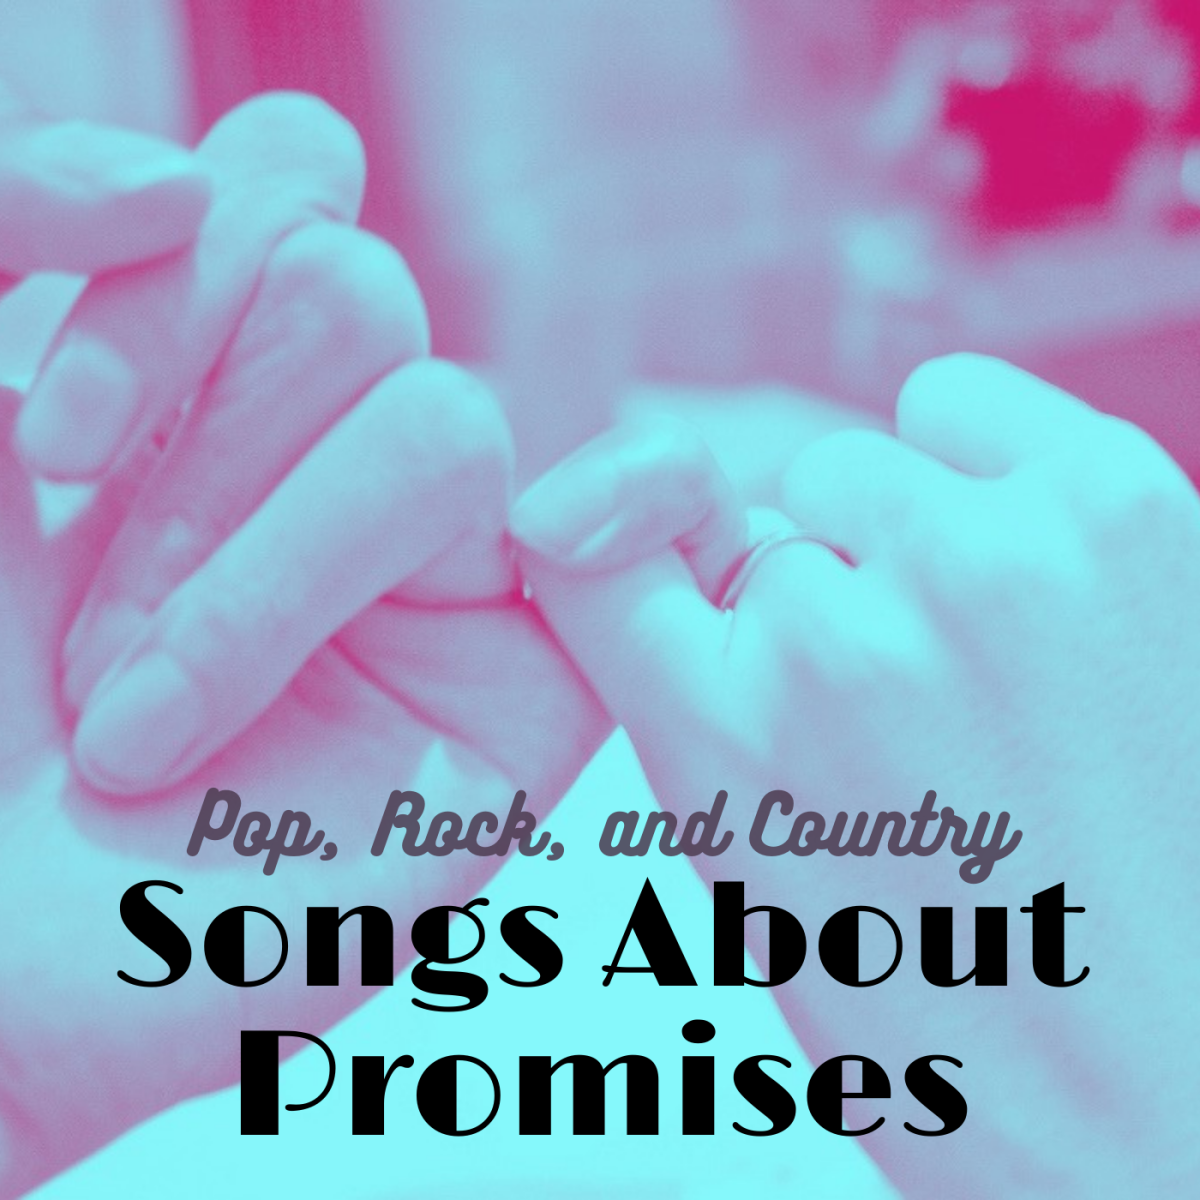 67 Songs About Promises